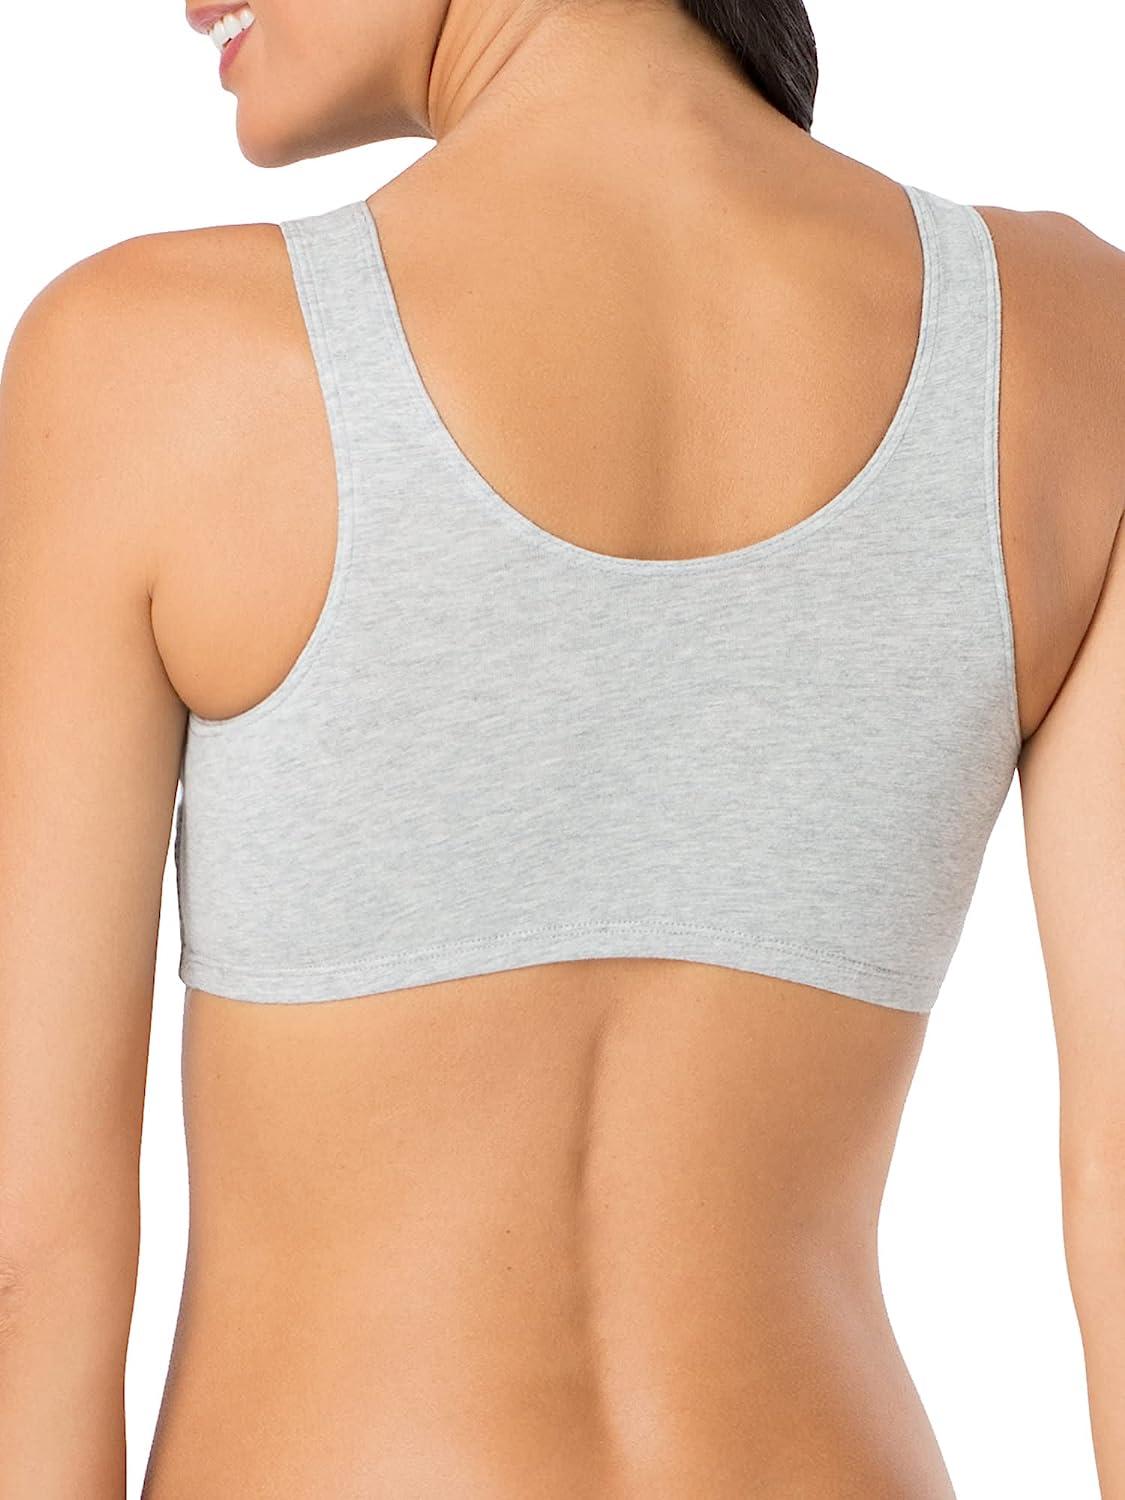 Fruit of the Loom Womens Built Up Tank Style Sports Bra 50 Mint